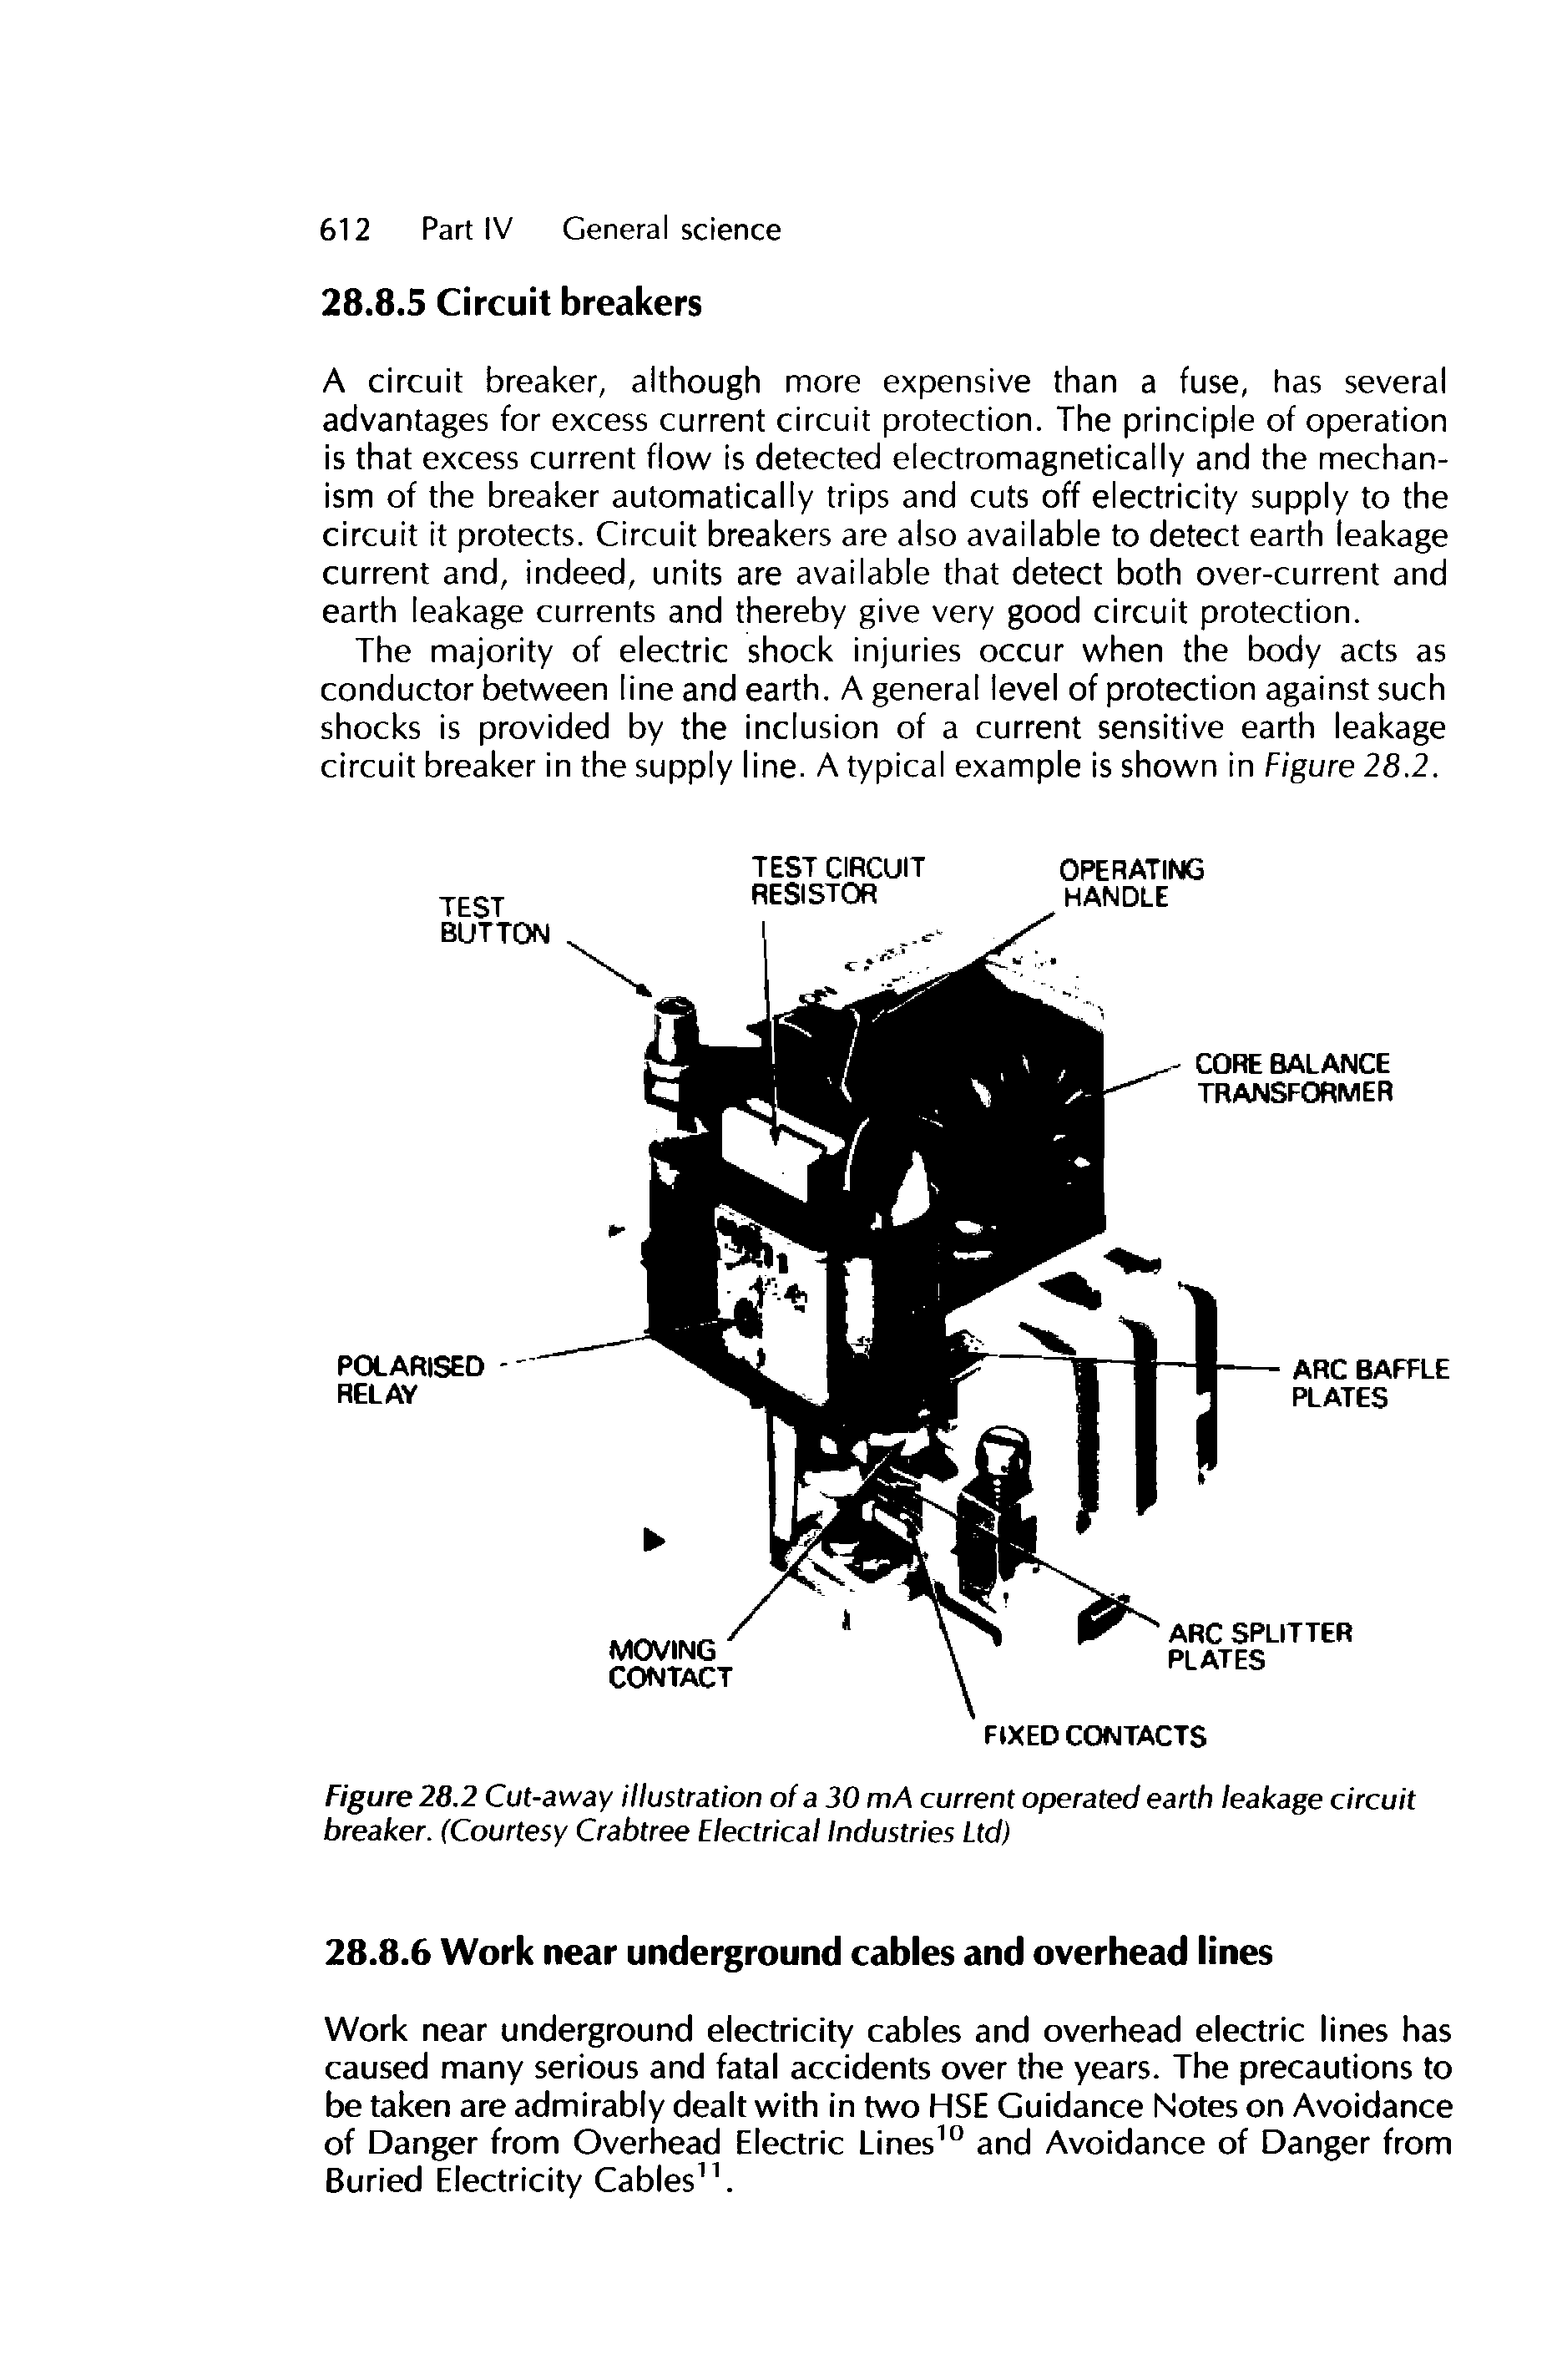 Figure 28.2 Cut-away illustration of a 30 mA current operated earth leakage circuit breaker. (Courtesy Crabtree Electrical Industries Ltd)...